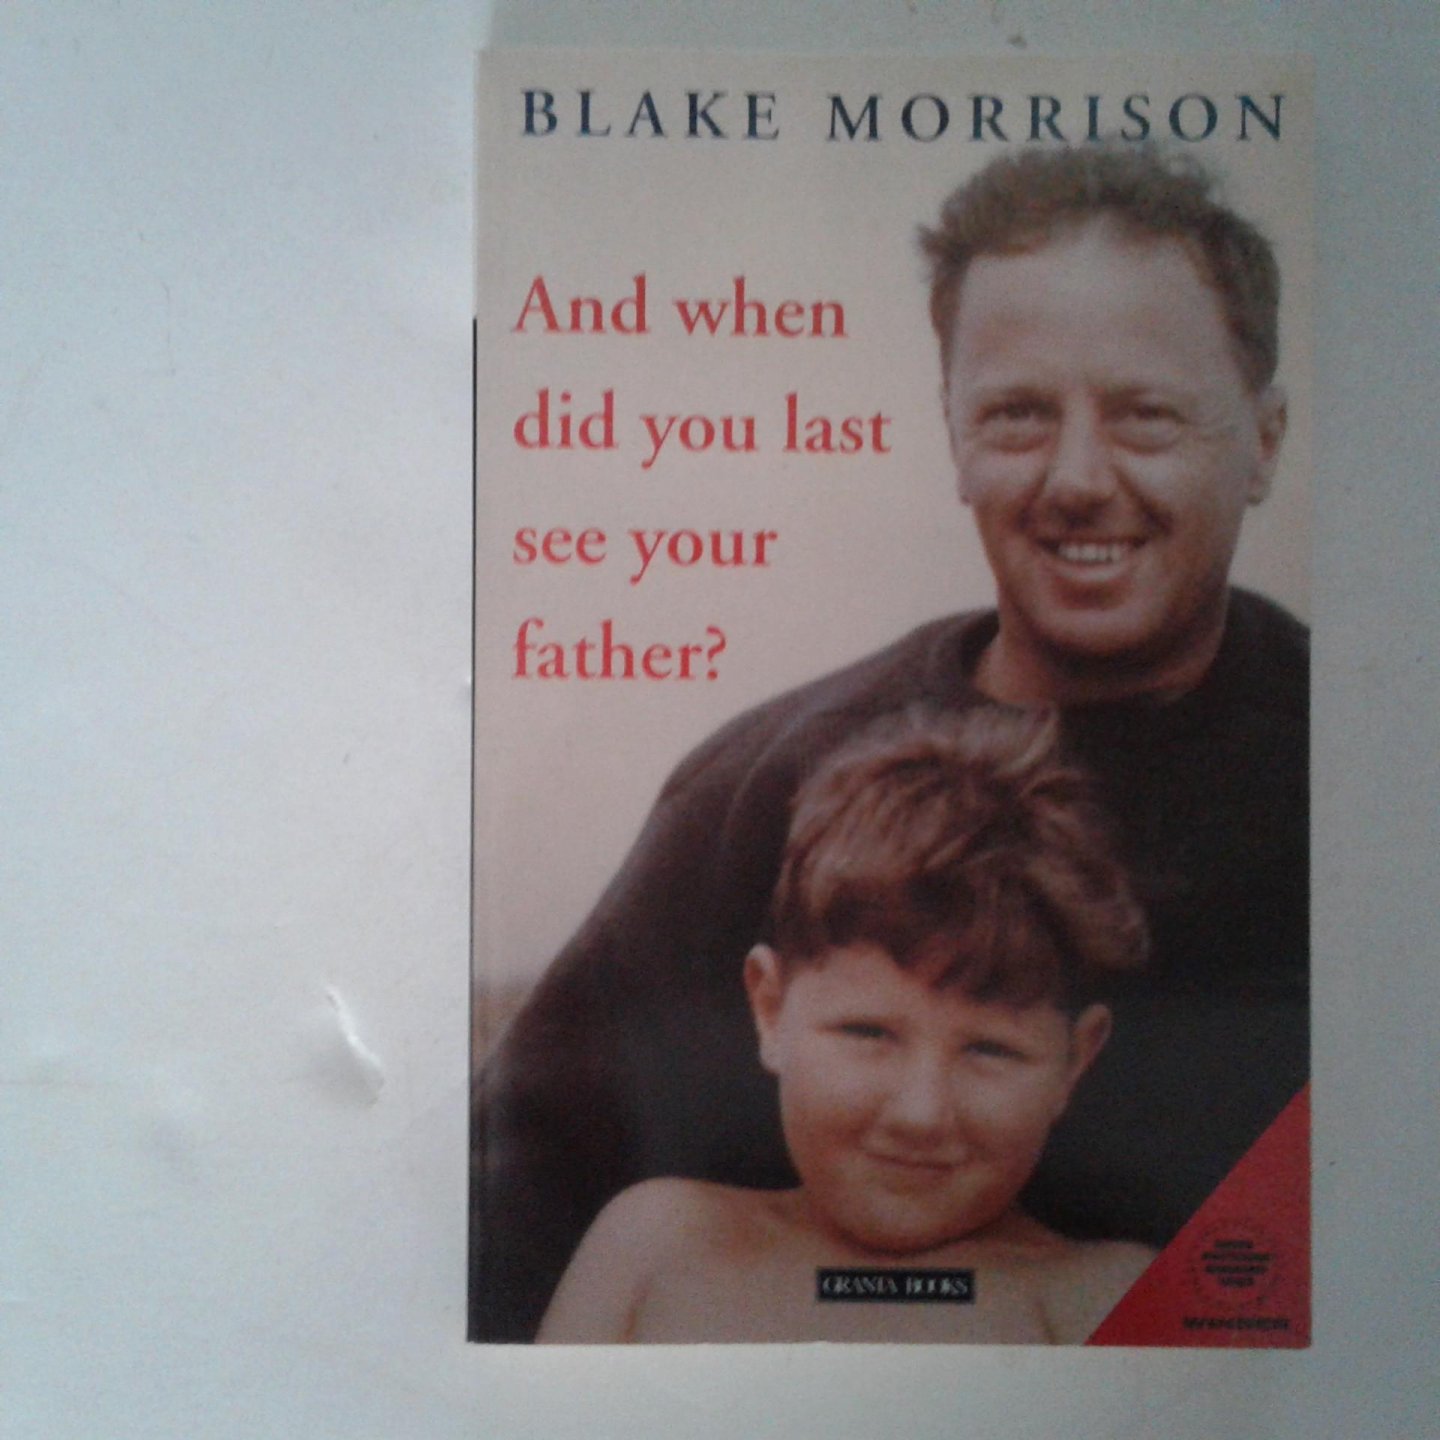 Morrison, Blake - And when did you last see your father?